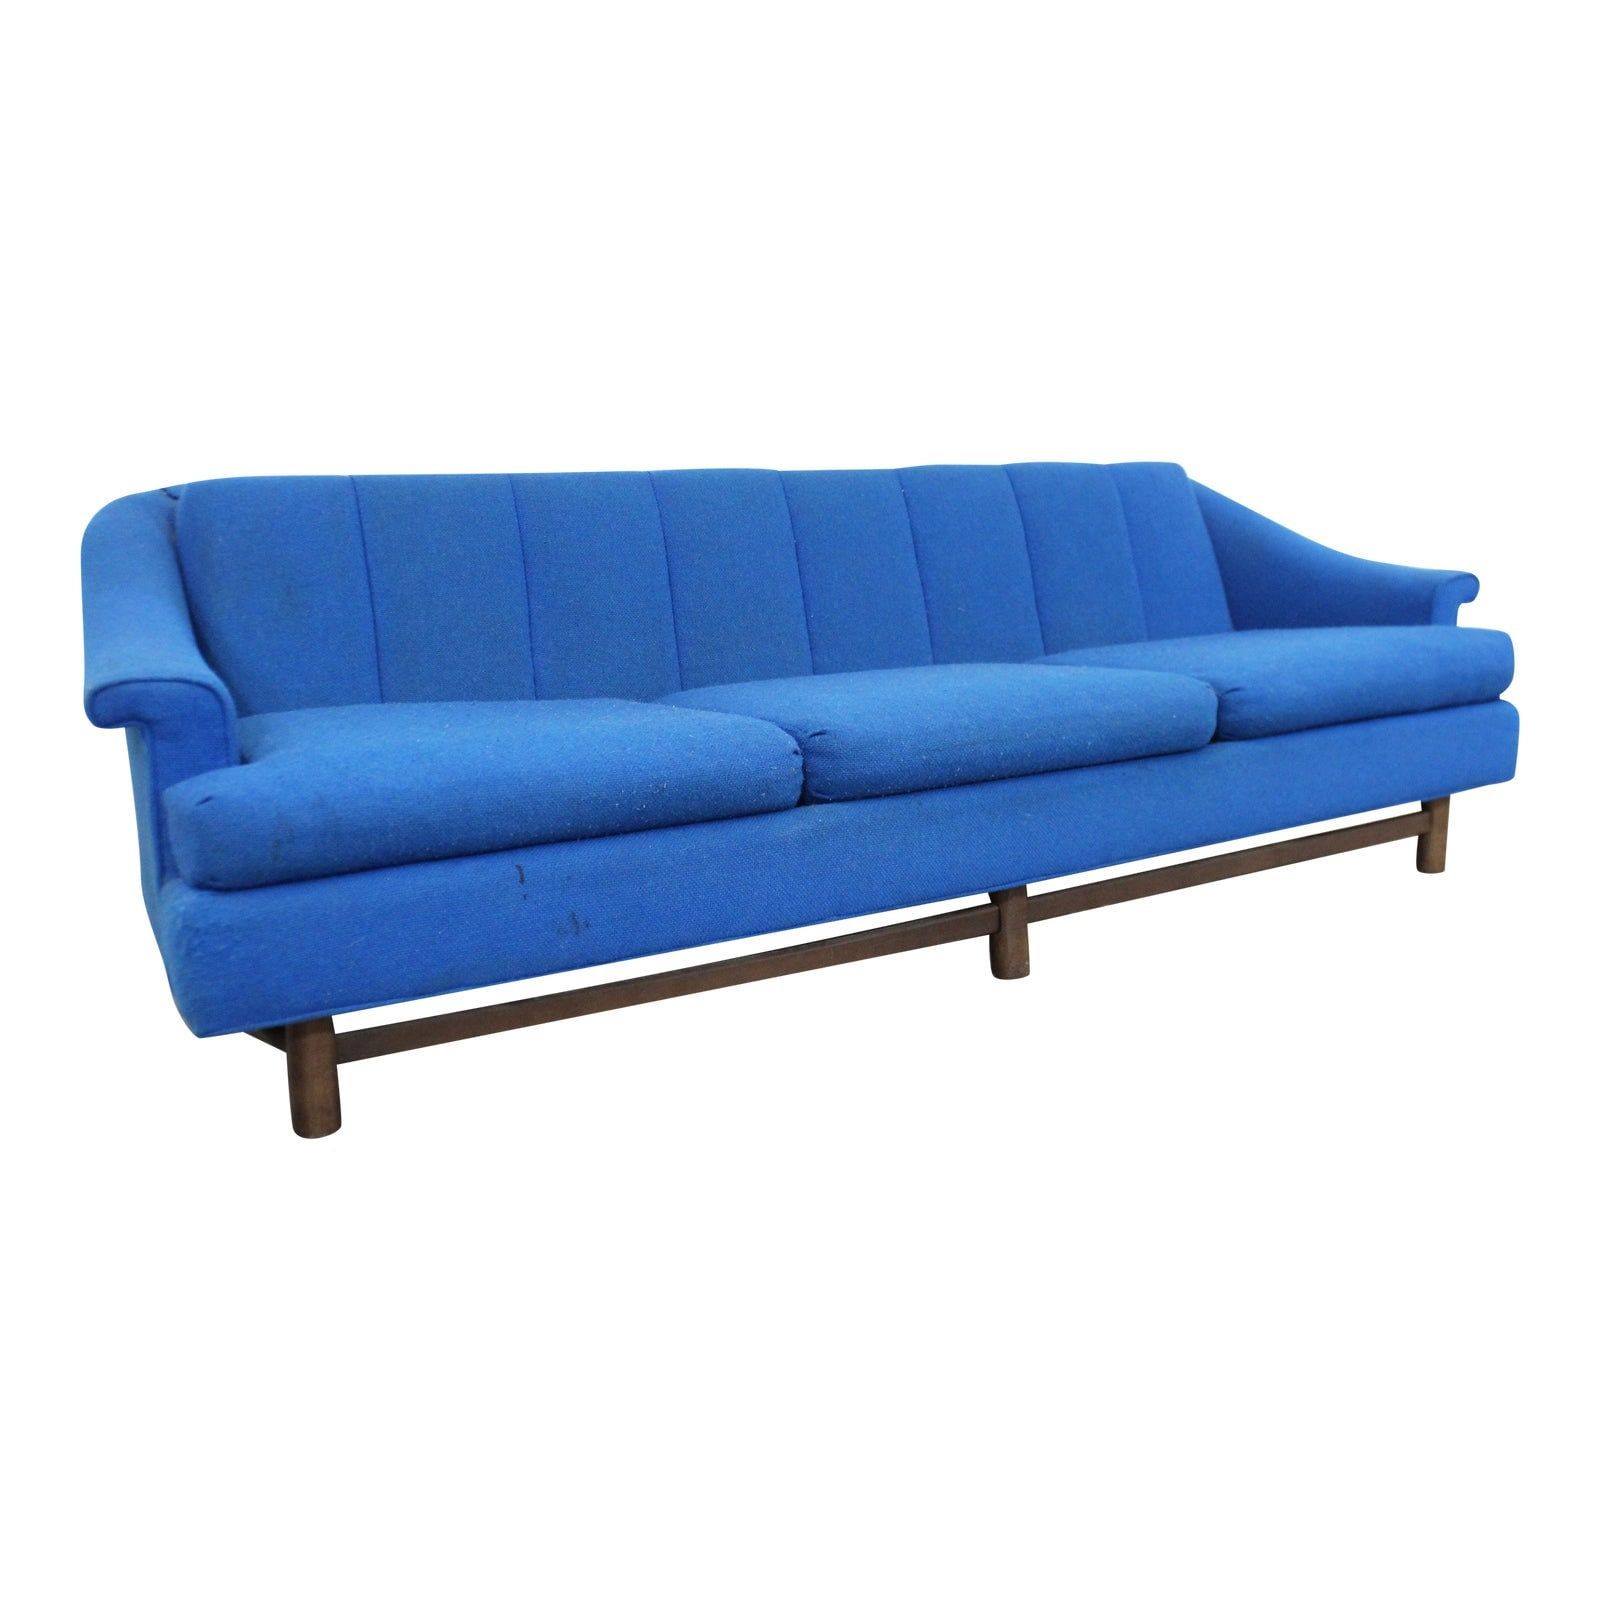 Mid Century Modern Blue 3 Seater Sofa On Wood Base, Danish Modern Couch Throughout Mid Century 3 Seat Couches (Gallery 1 of 20)